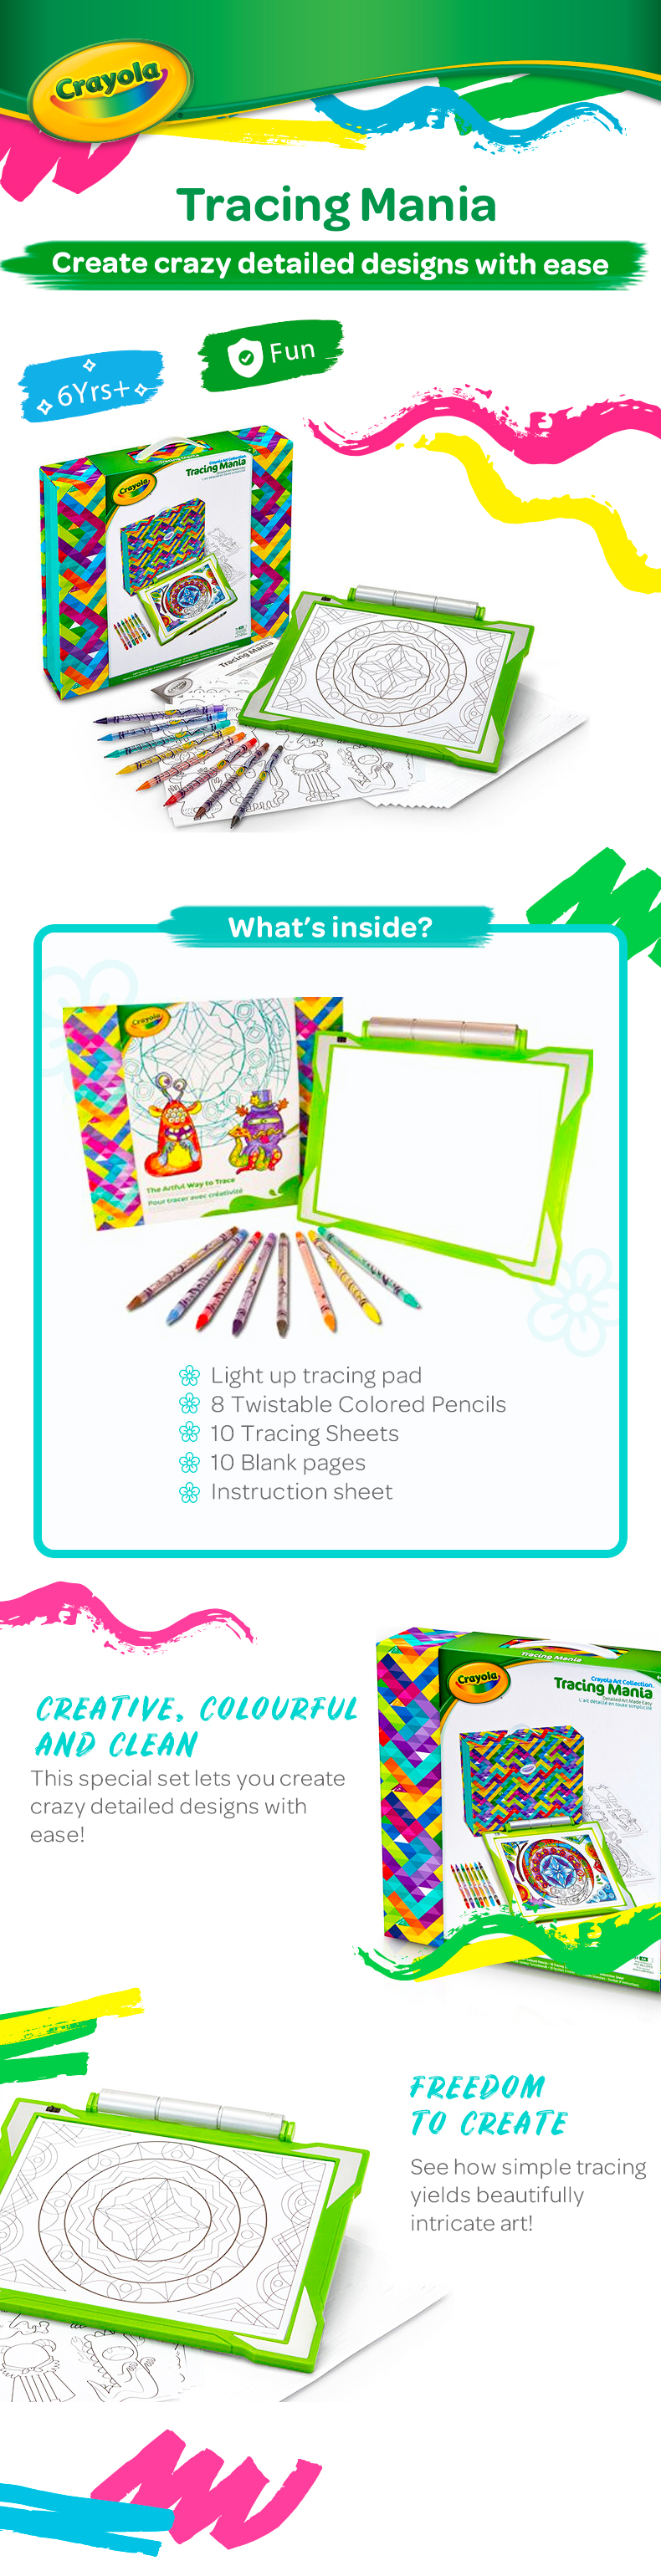 Crayola Tracing Mania Create Crazy Detailed Designs With Ease